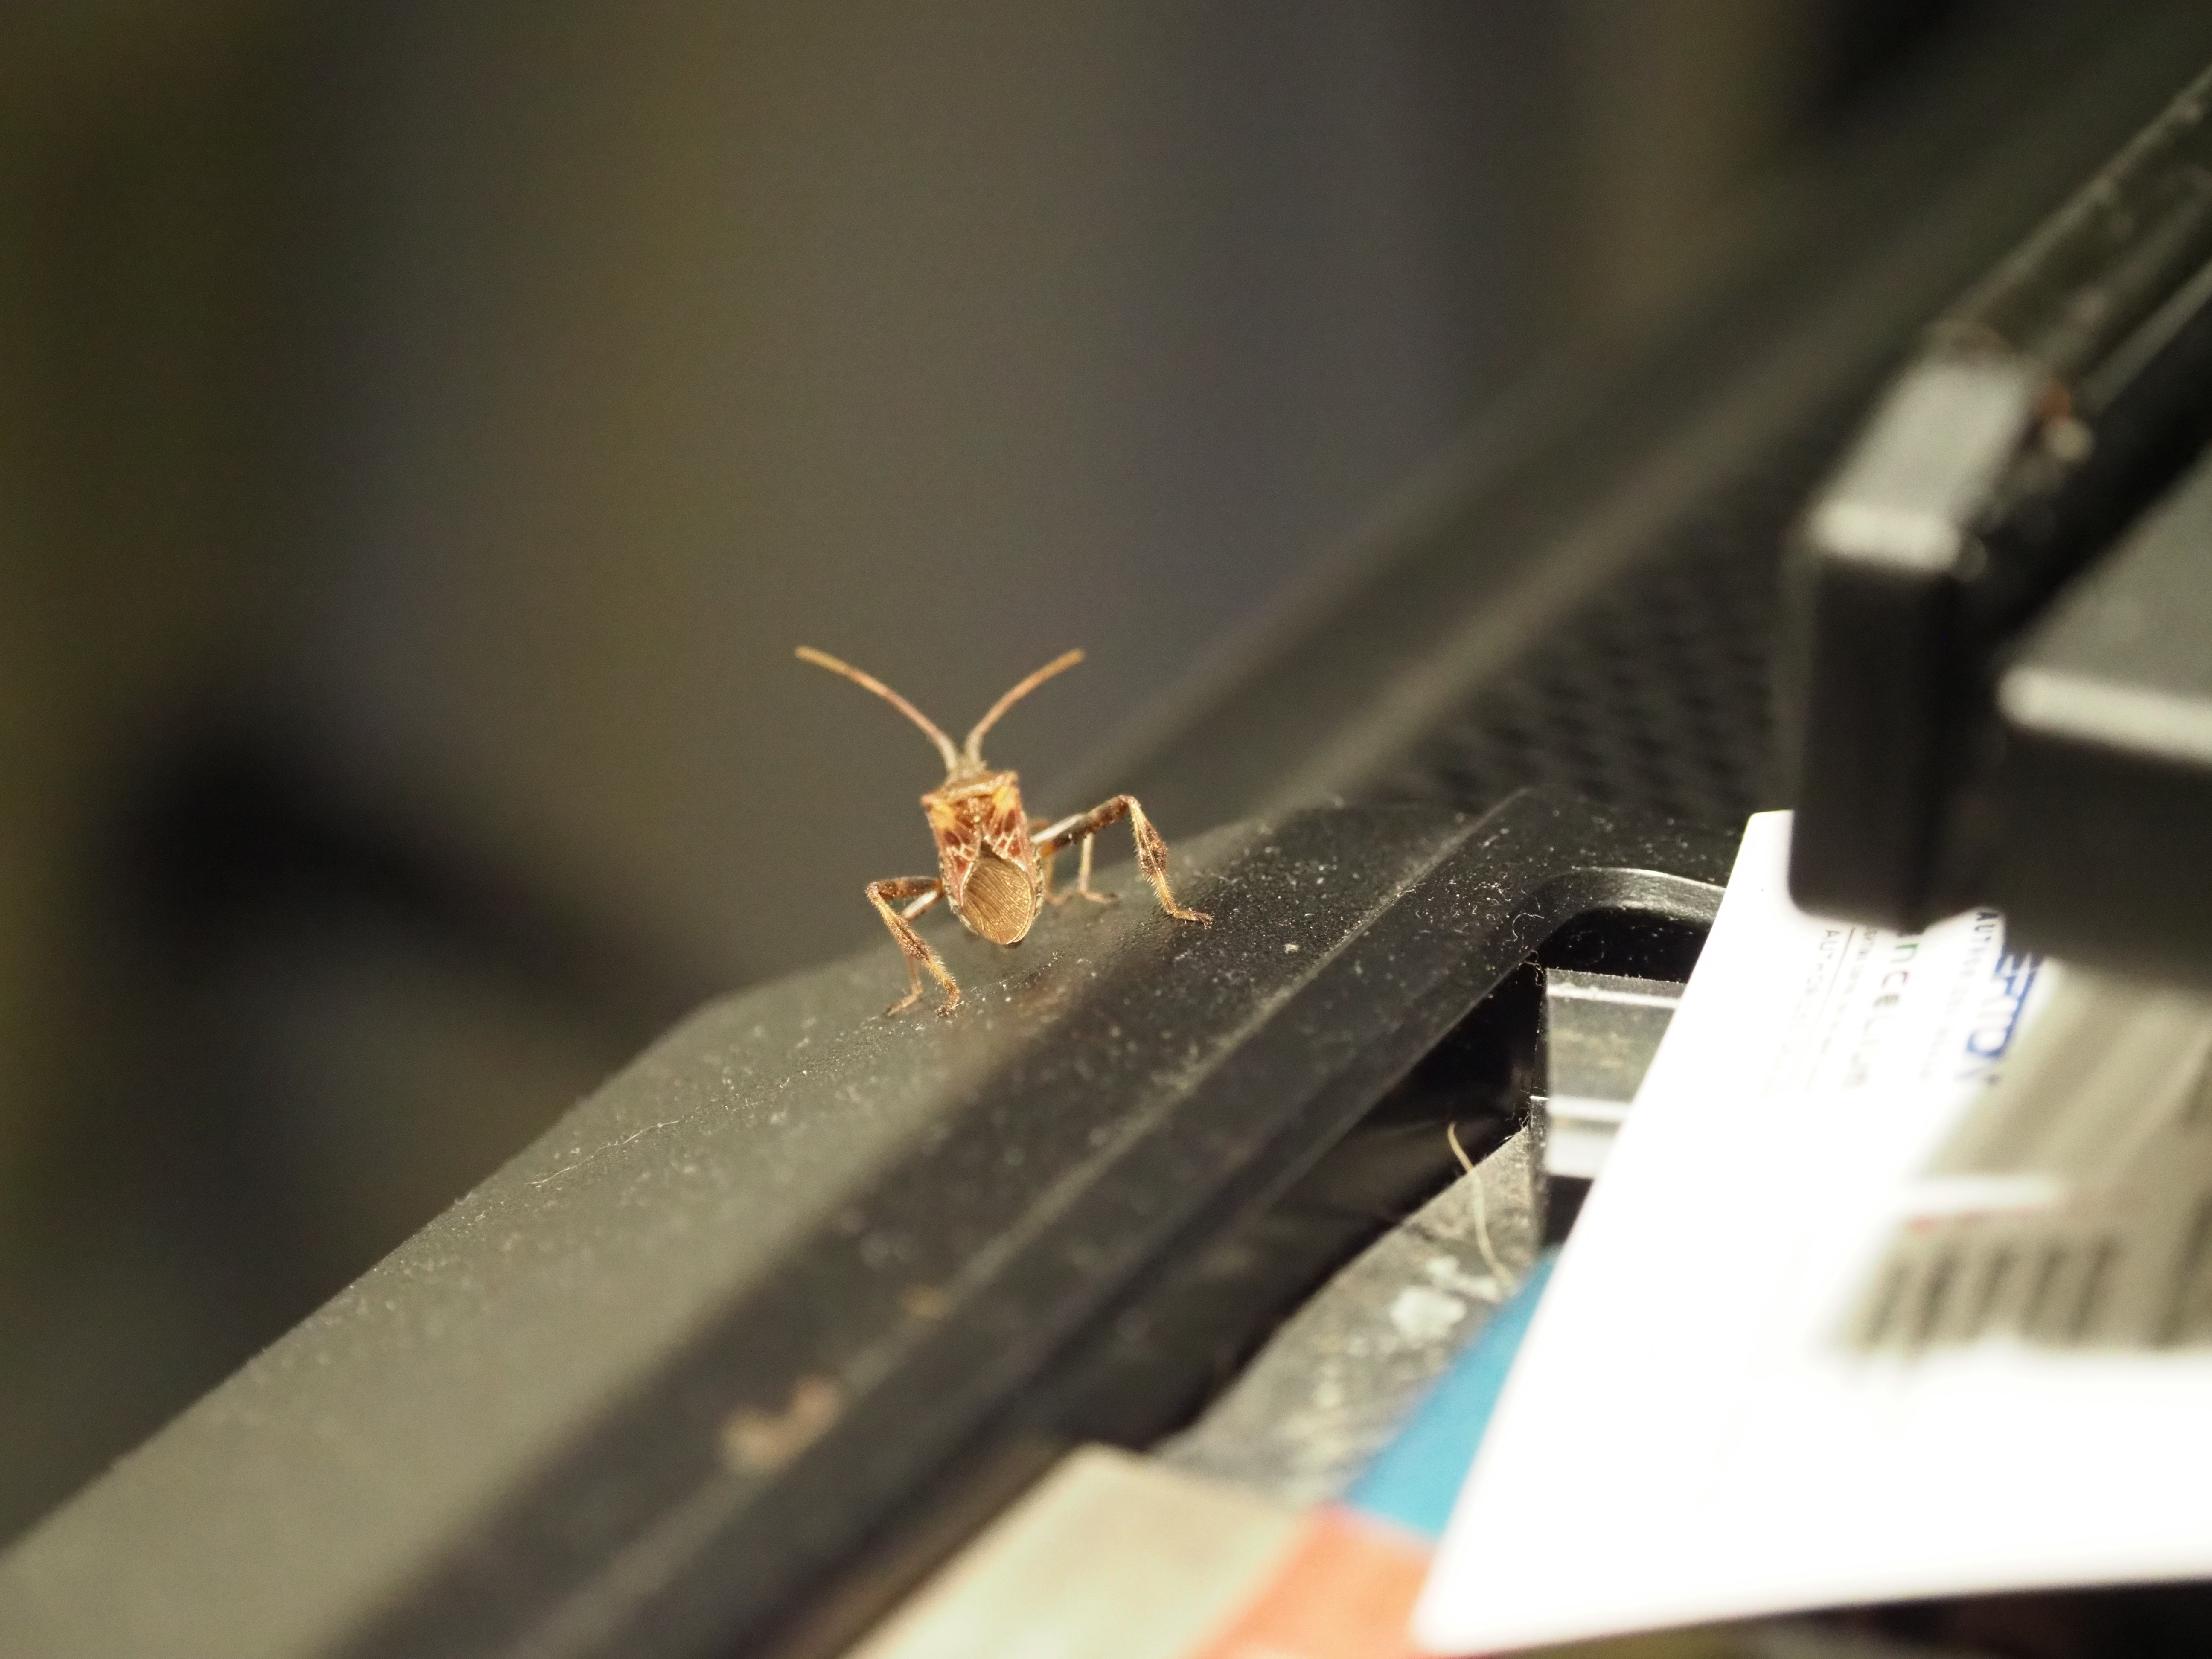 As I was writing this week’s column this western conifer seed bug landed on the case of my computer. One of our fall invaders, it emits an evergreen to turpentine odor when crushed but causes no damage when it gets indoors.